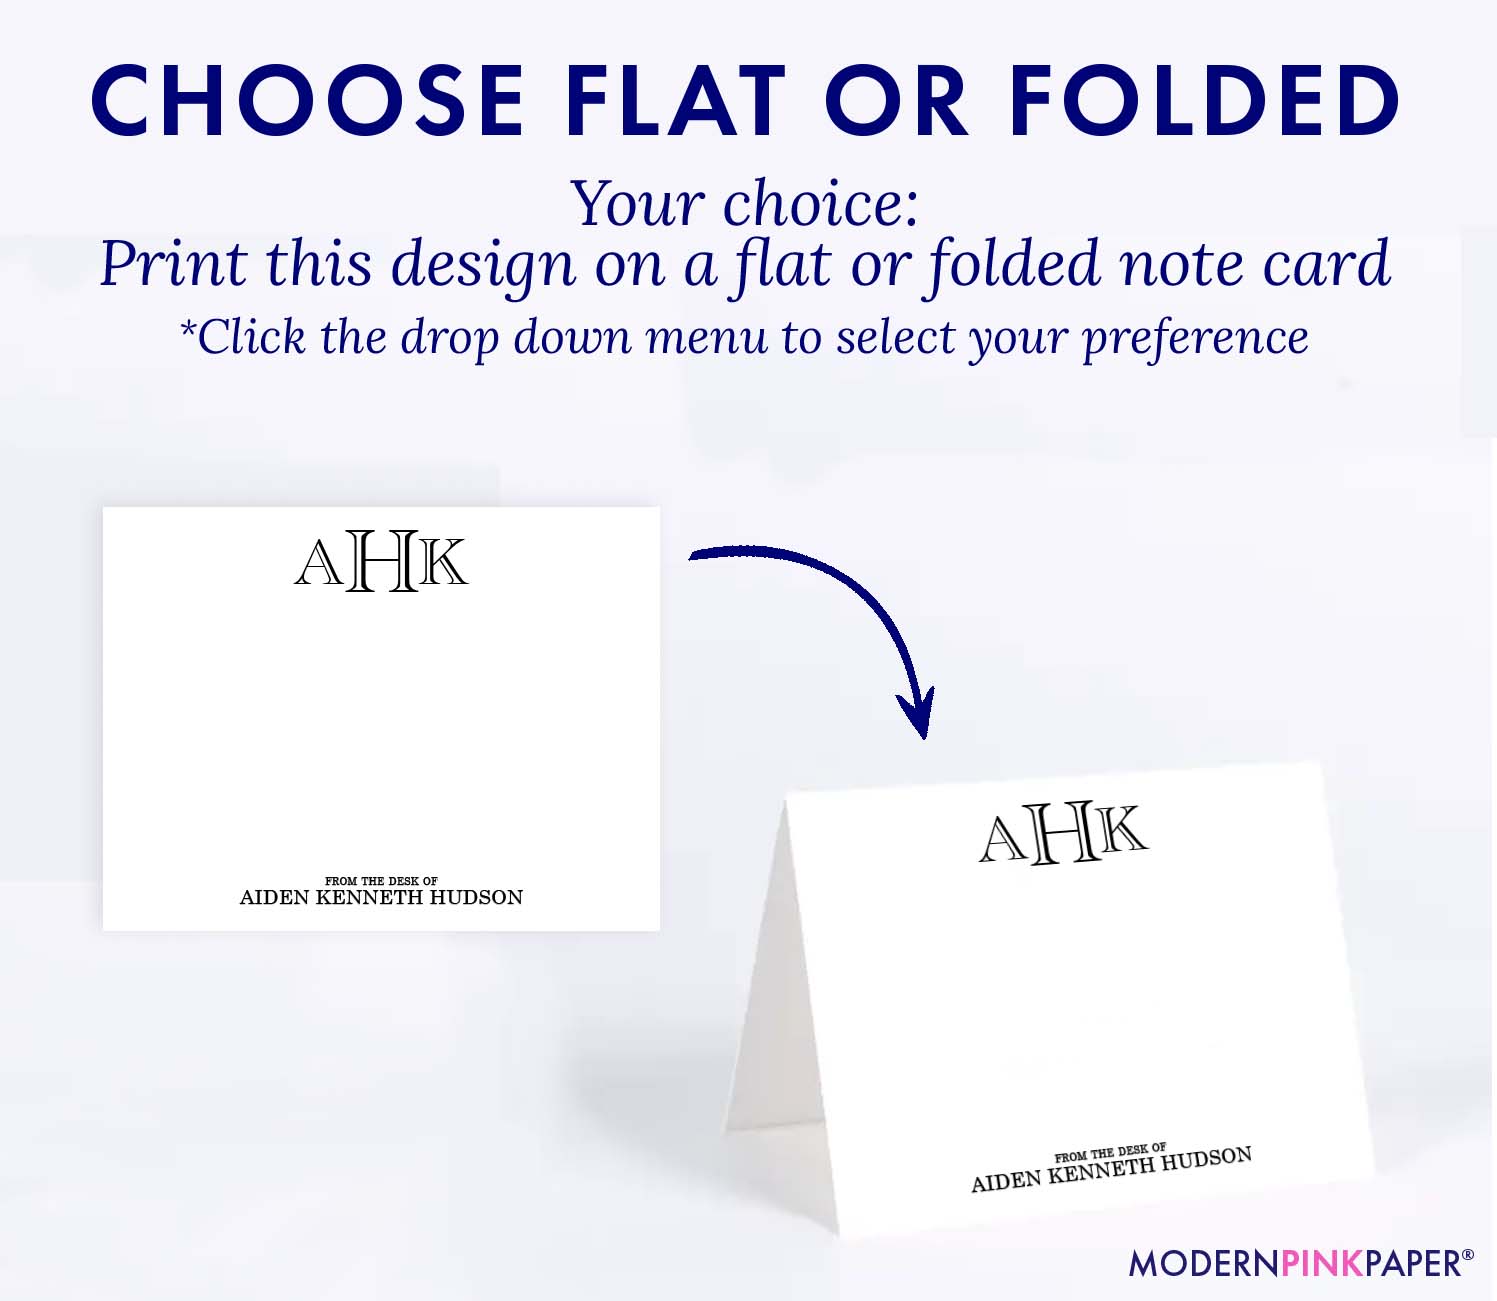  Personalized Note Card Stationery with Envelopes for Men with  Border, Monogram and Full Name, Mens Stationary Set of Flat Notecards in  Choice of Colors : Handmade Products